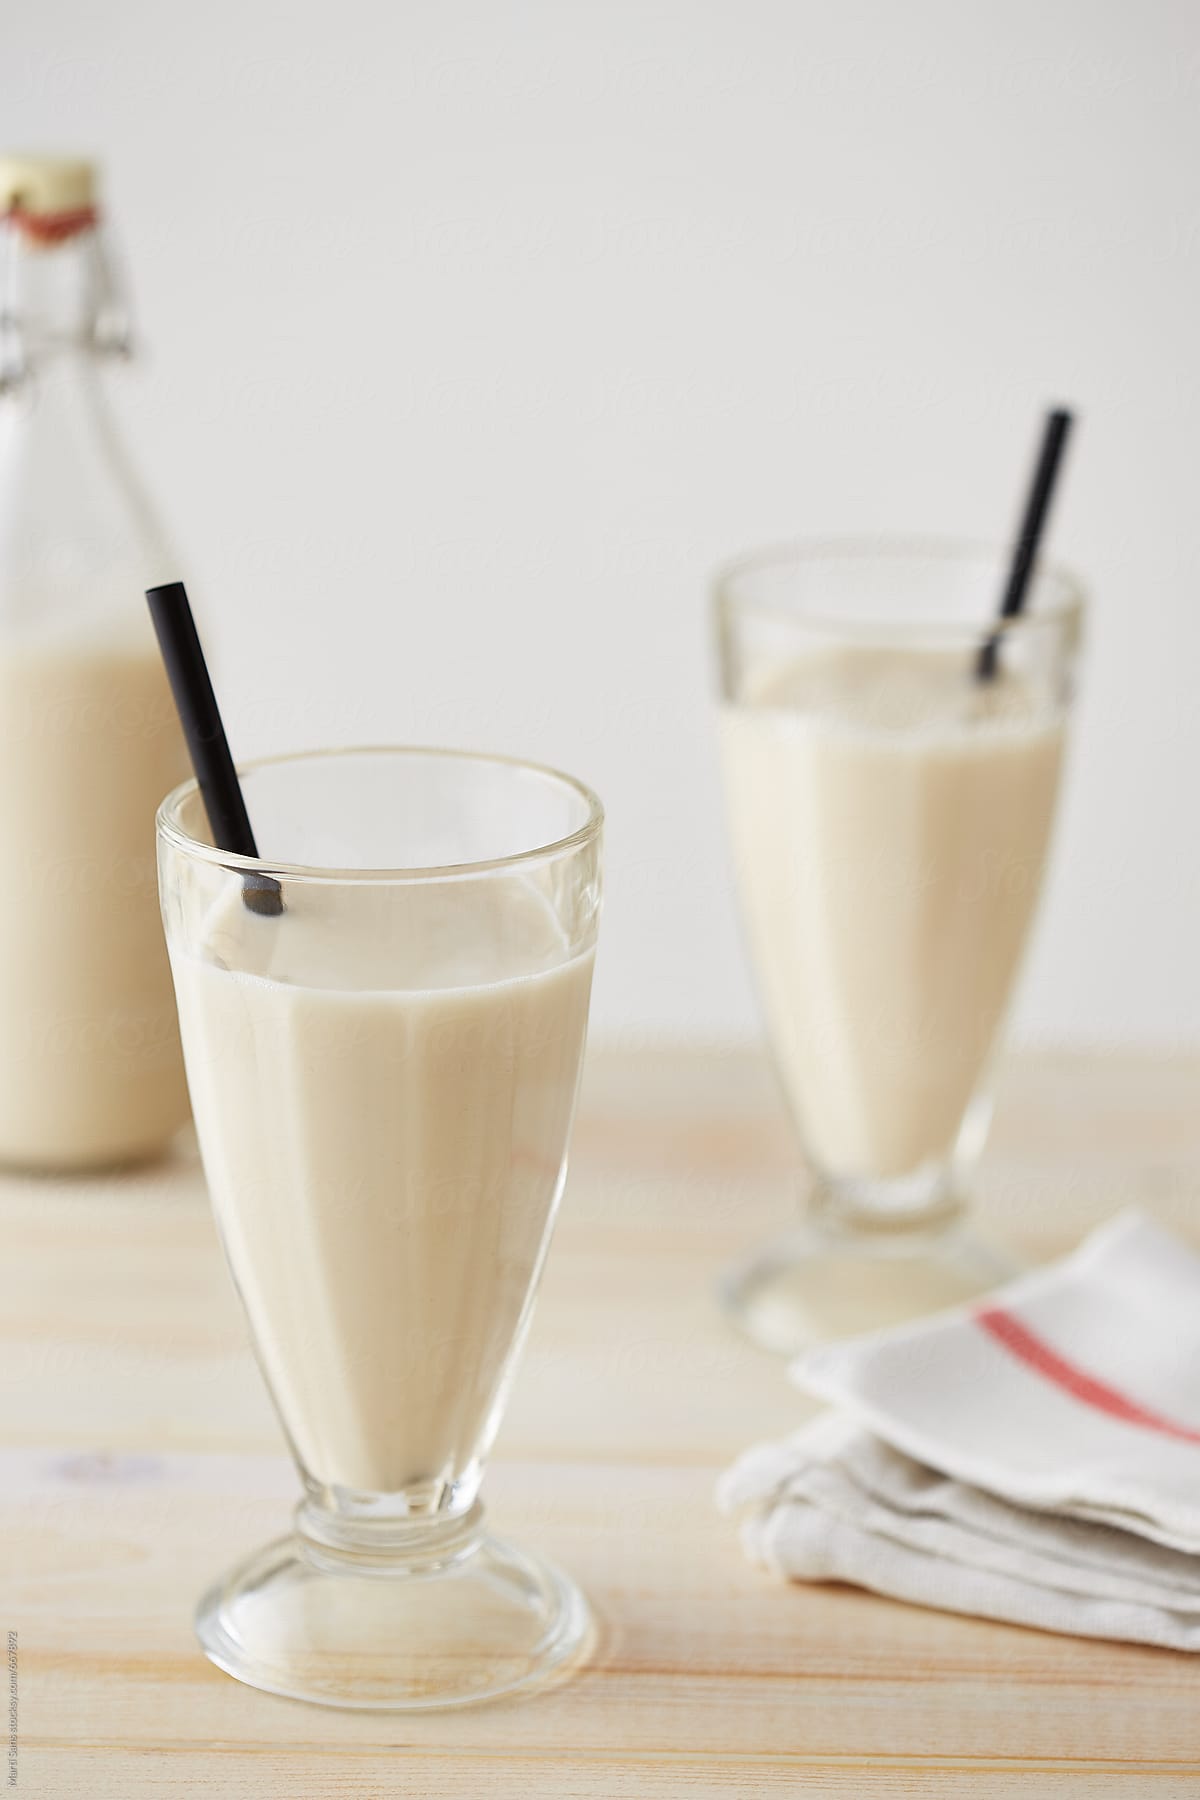 Homemade Valencian horchata in glasses and bottle